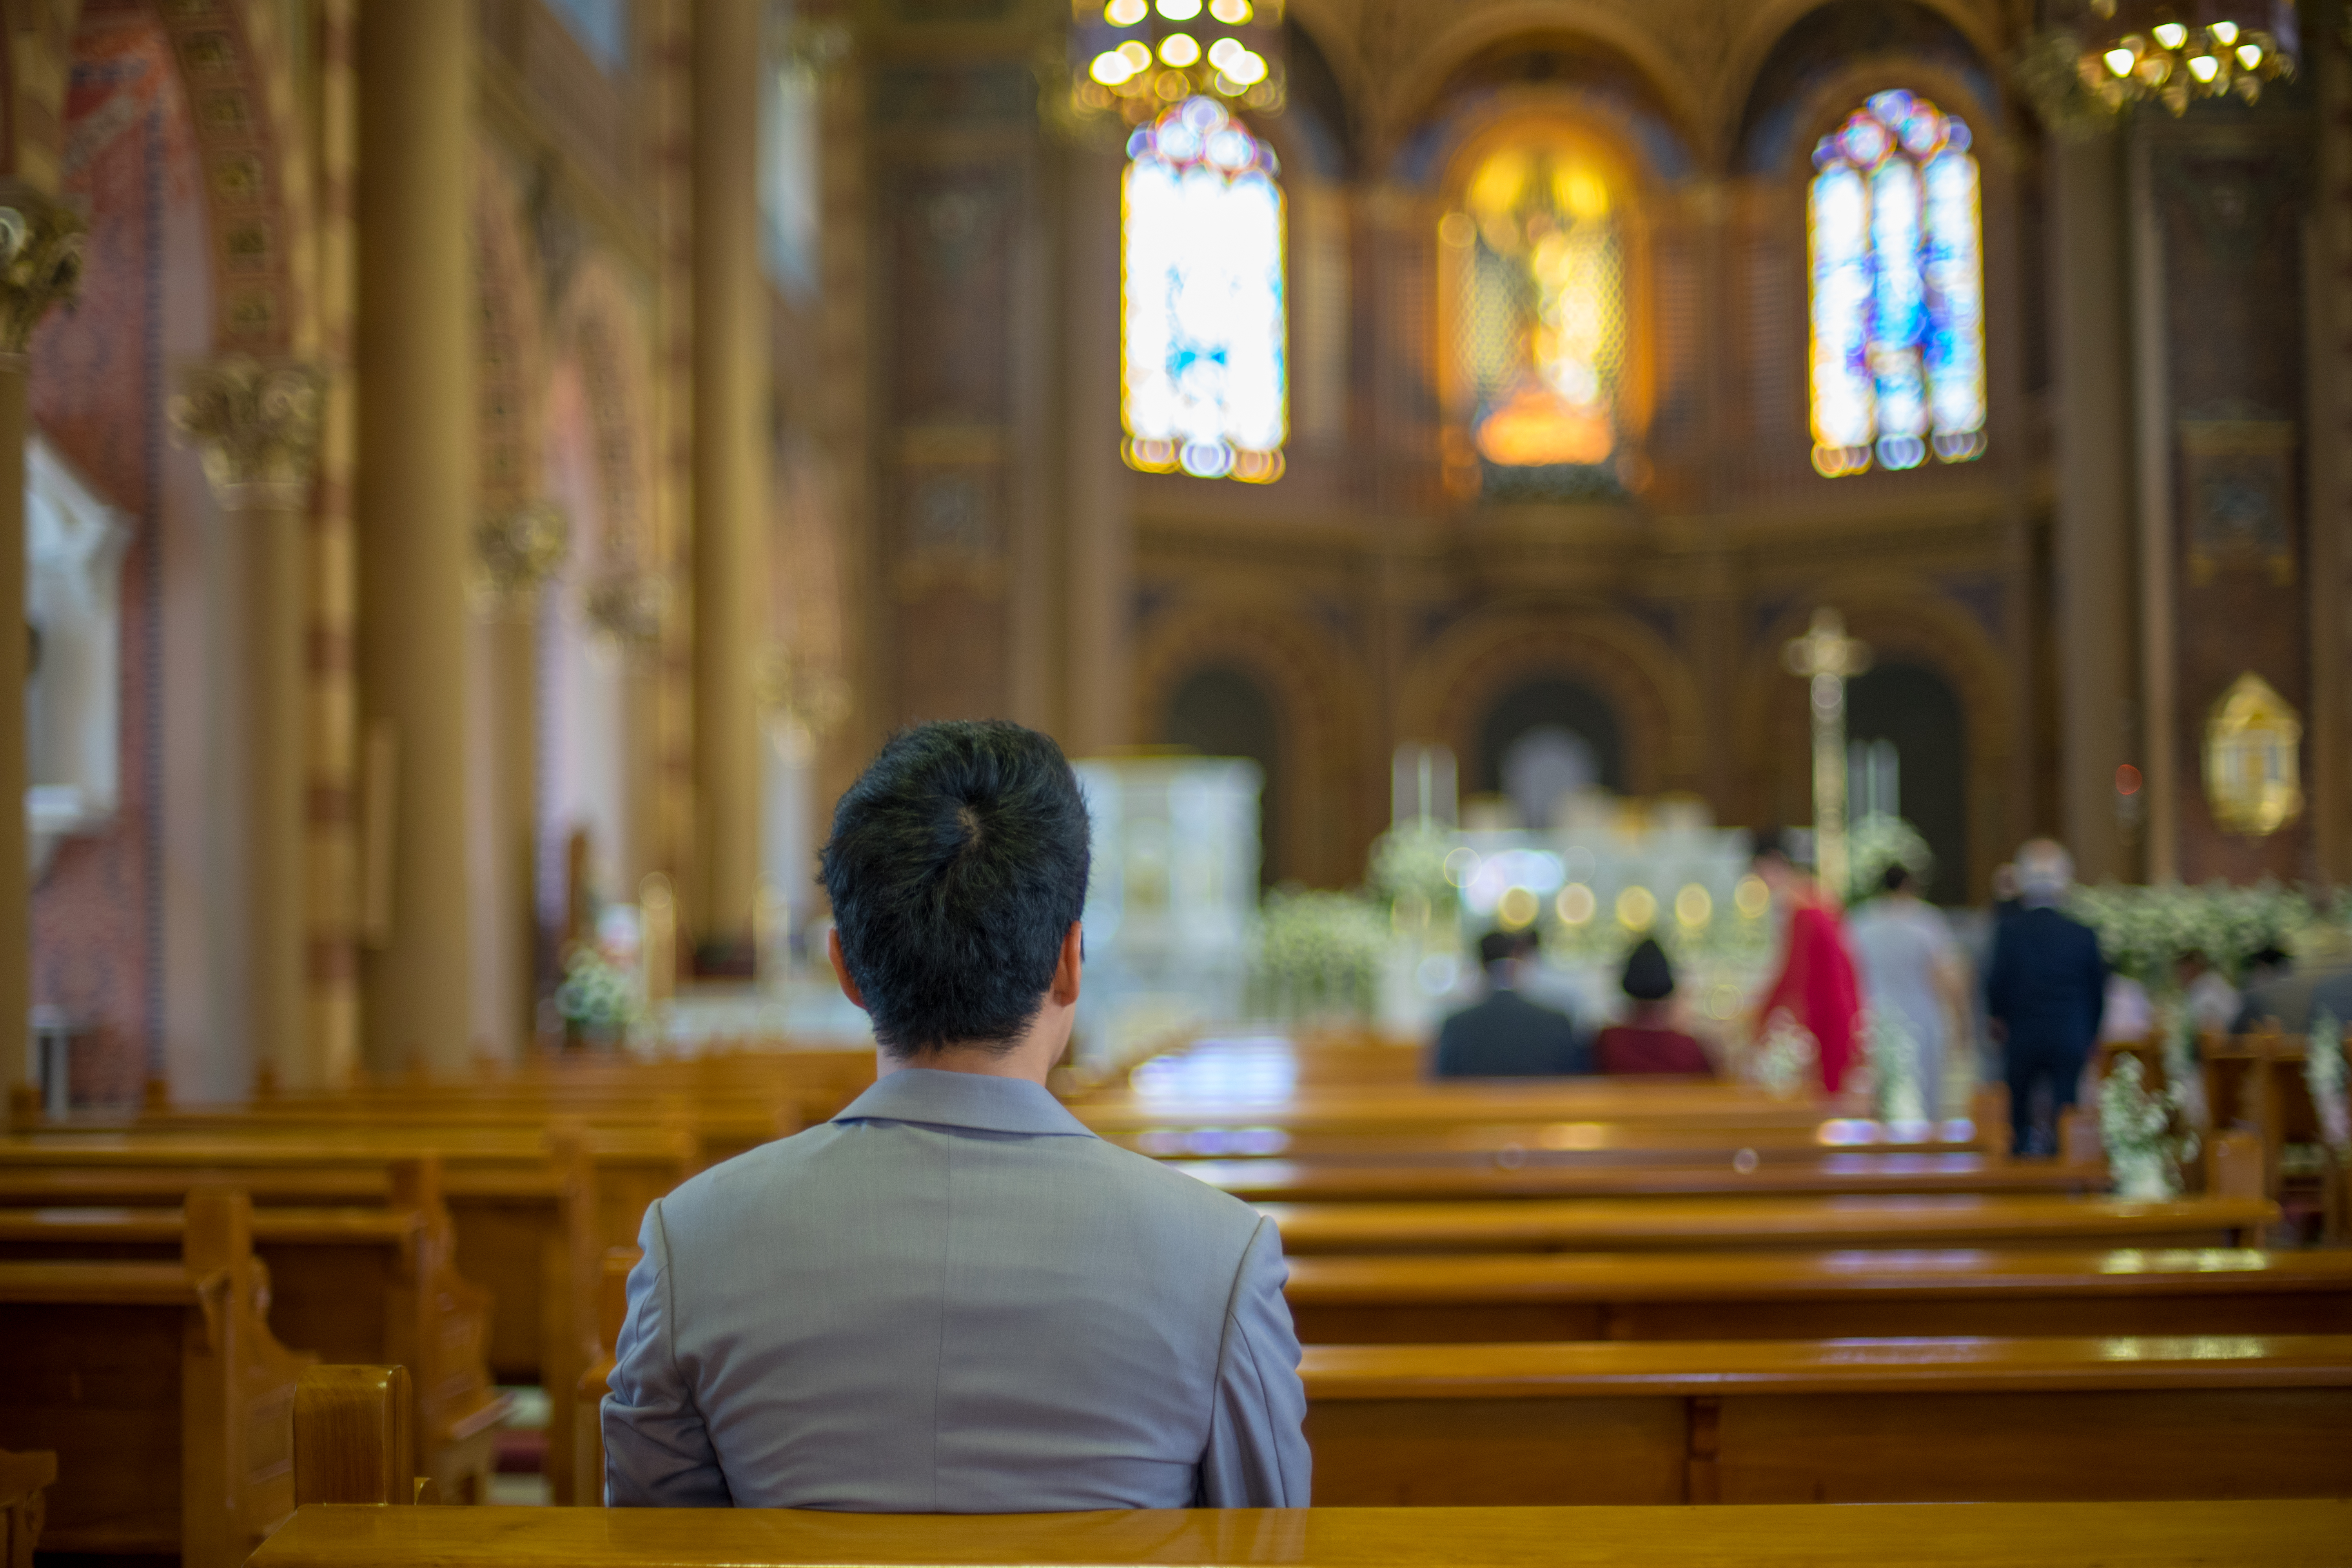 A young man sits at church | Source: Shutterstock